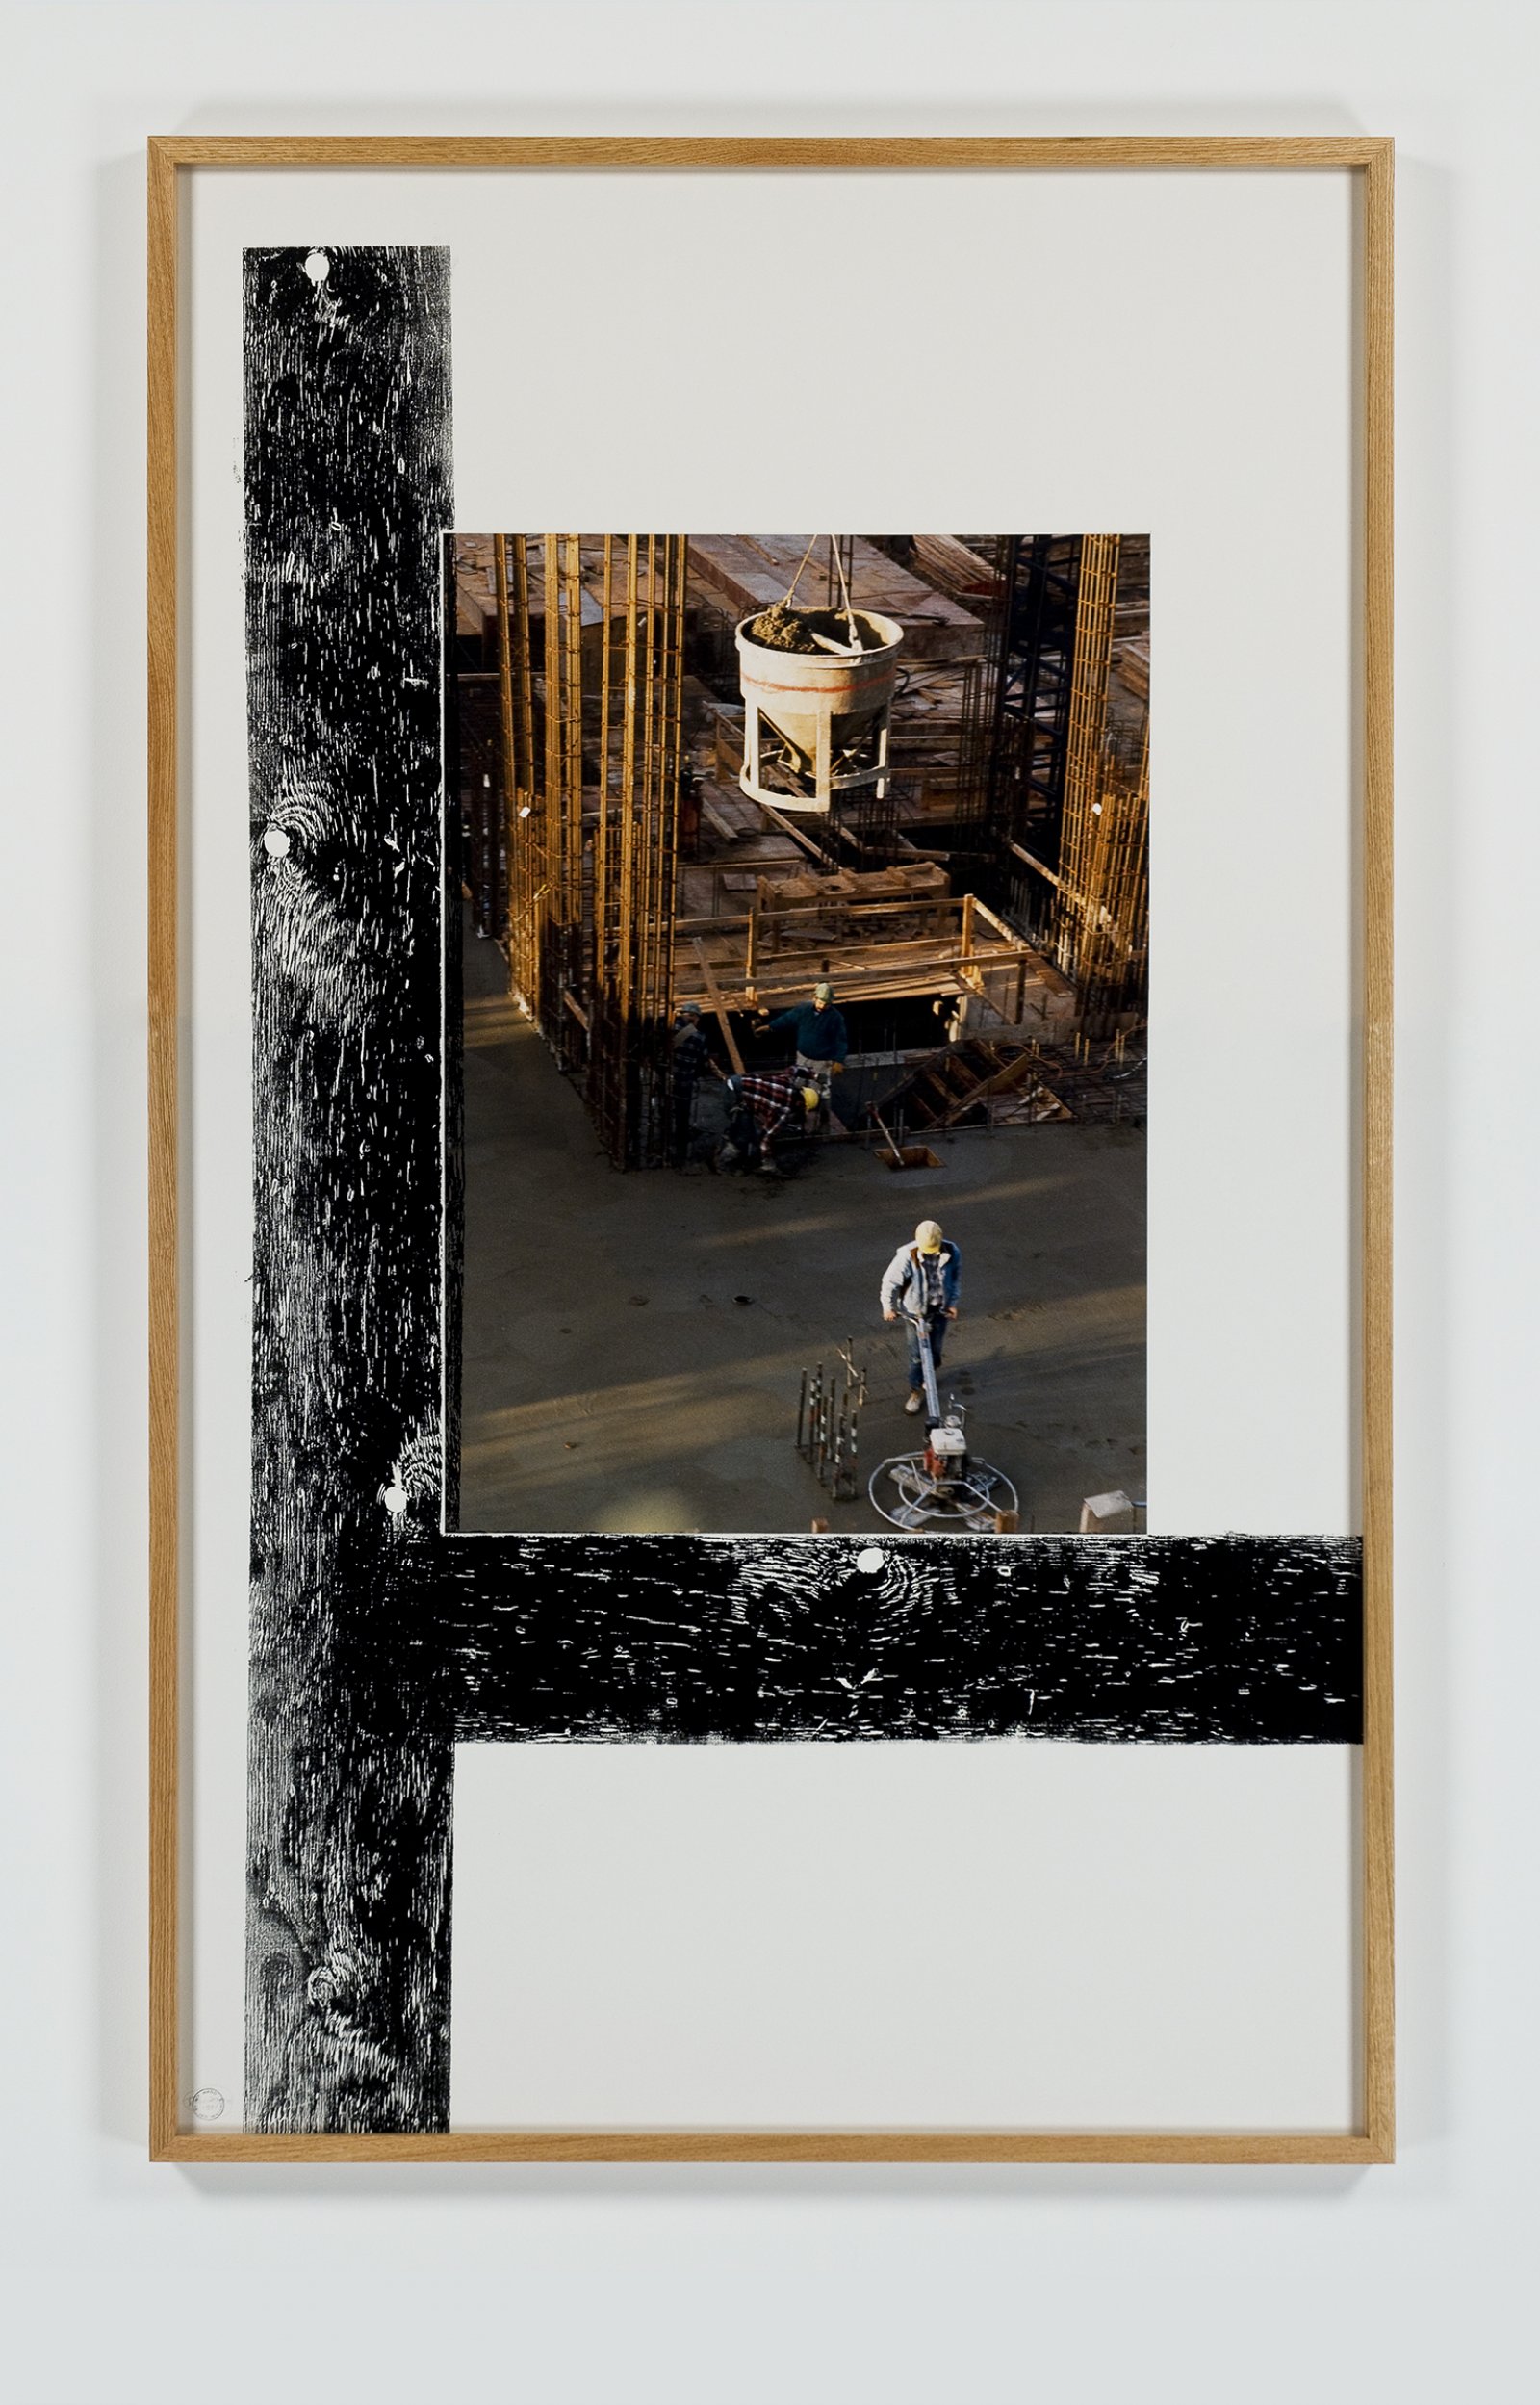 Ian Wallace, Construction Site I &amp; II, 1992, 2 photo and ink monoprints on paper, each 77 x 47 in. (196 x 119 cm) 